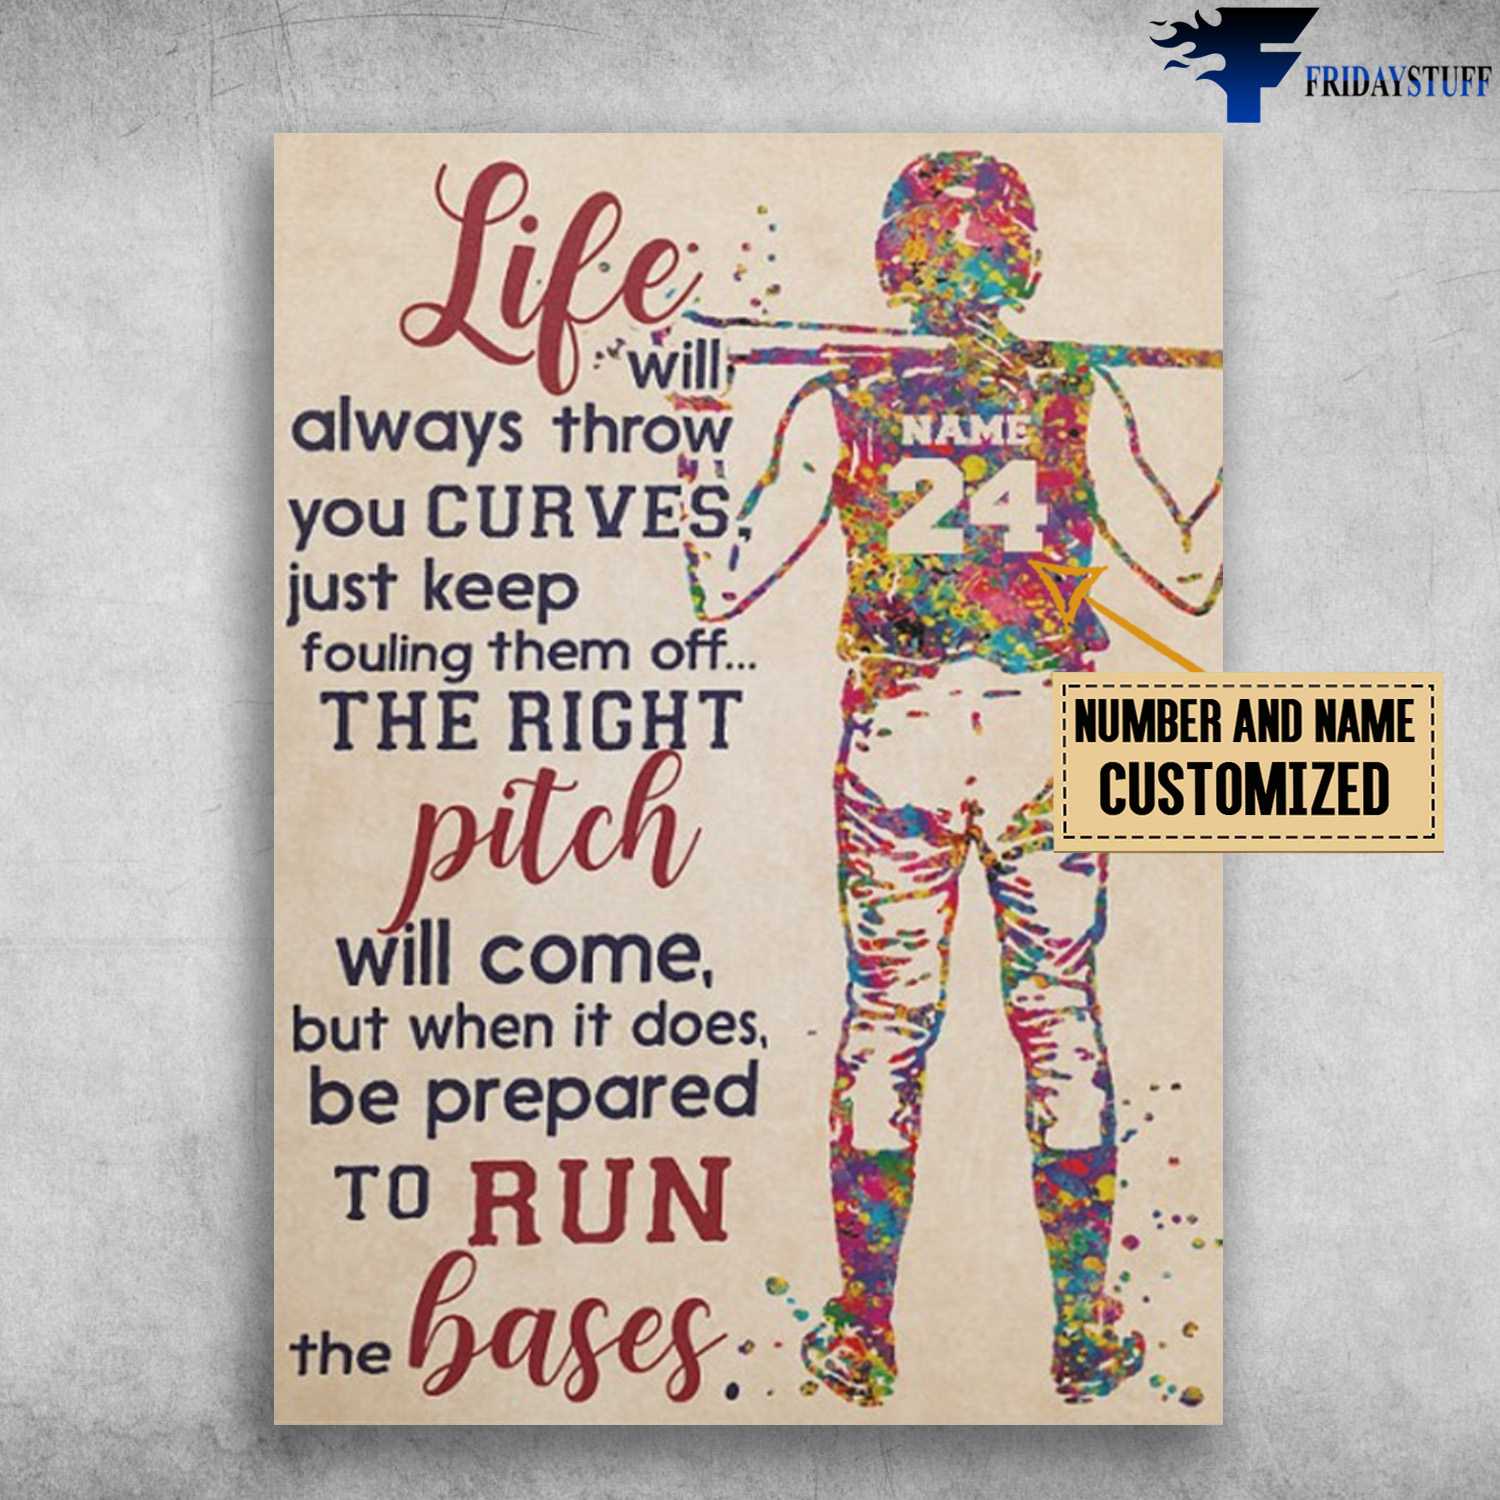 Baseball Poster, Baseball Decor, Life Will Always Throw Tour Curves, Just Keep Fouling Them Off, The Right Pitch Will Come